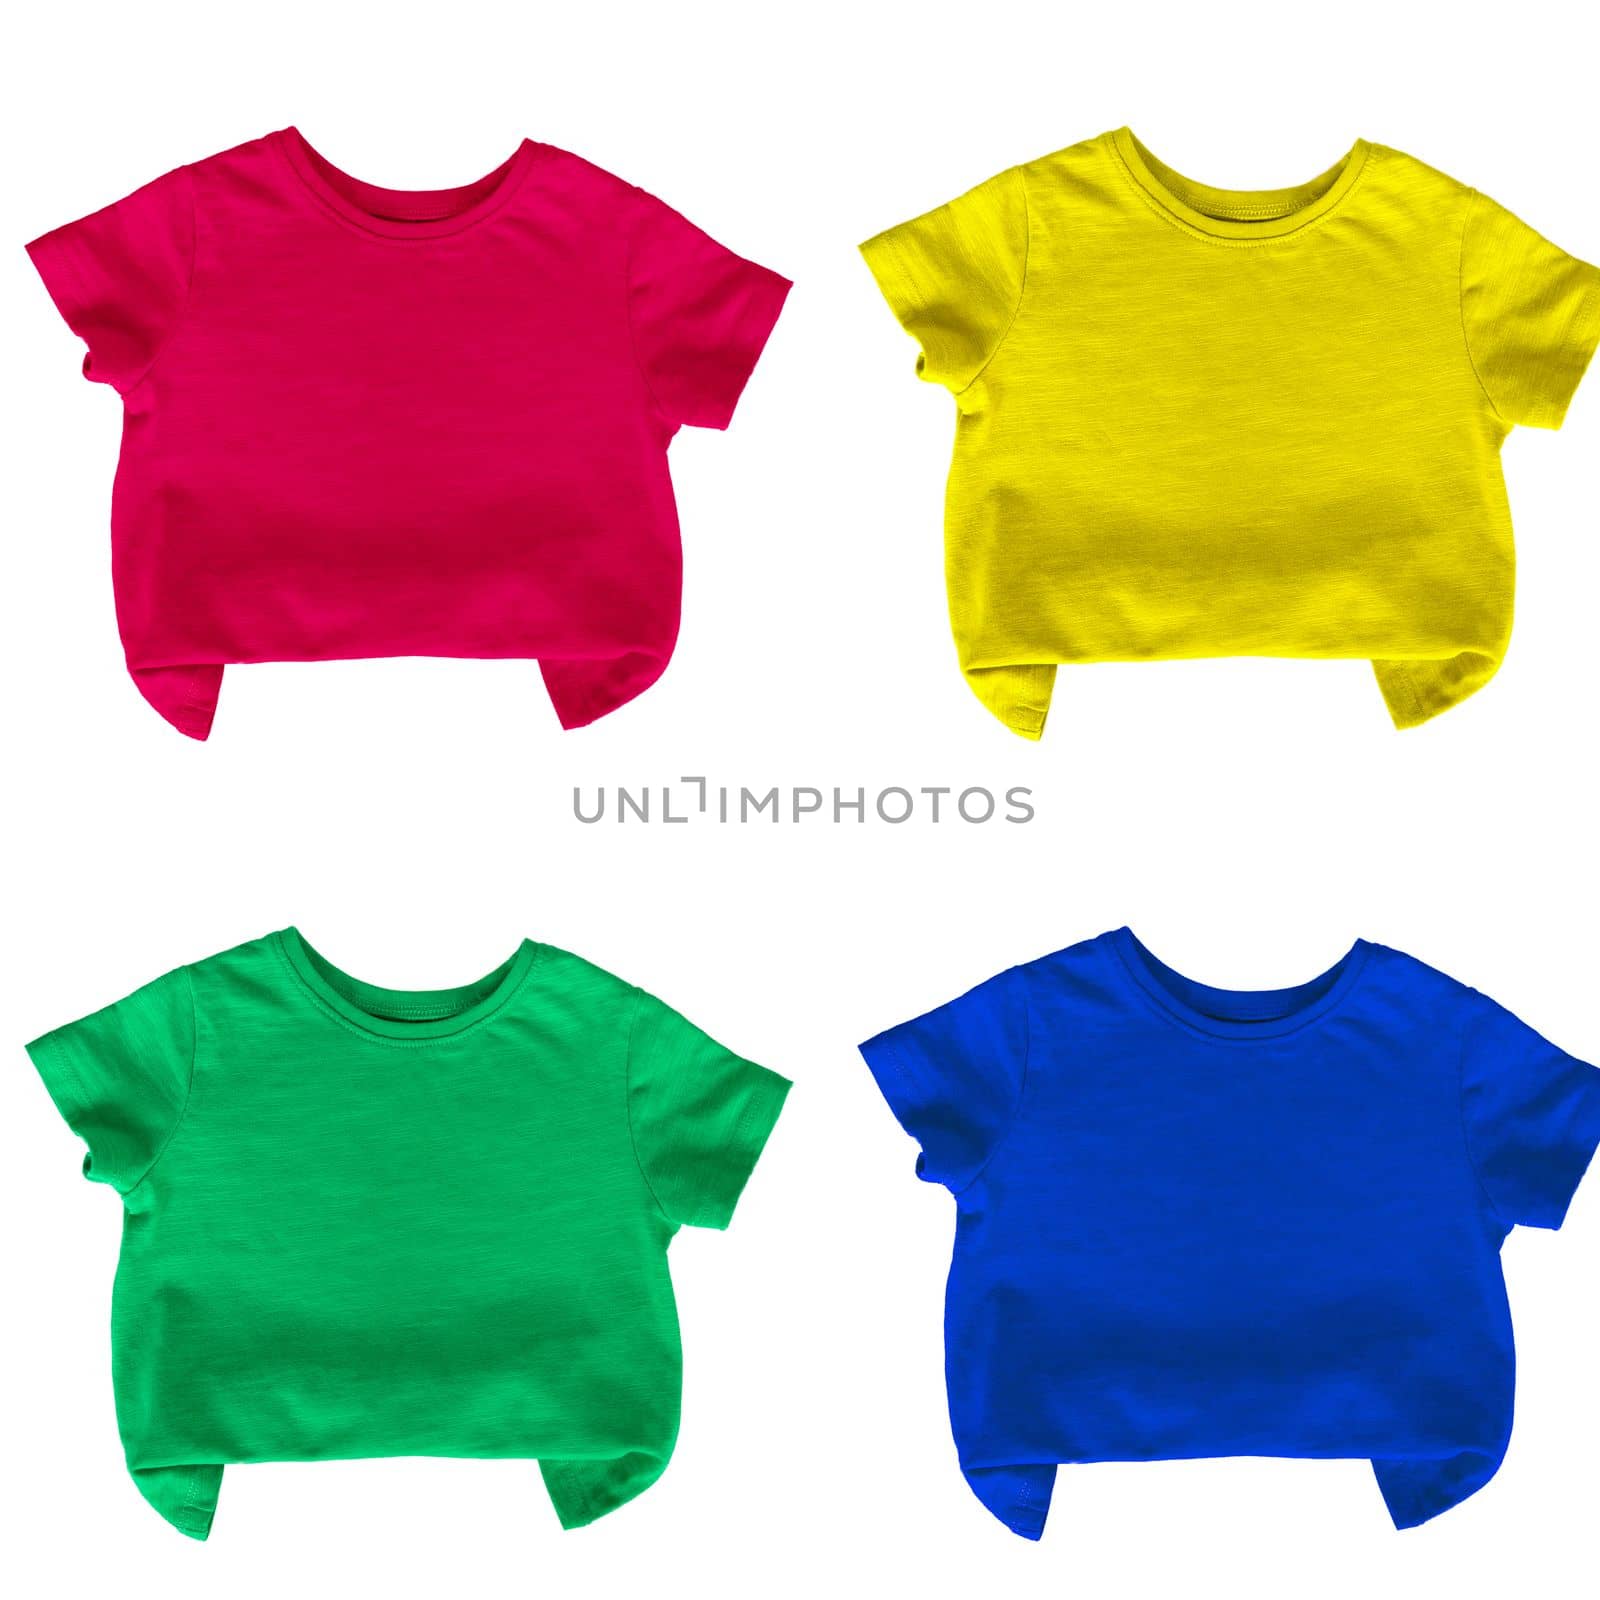 Kids t-shirt isolated on white background. Green color baby tshirt on white. Vivid Color trendy clothes. by Ri6ka